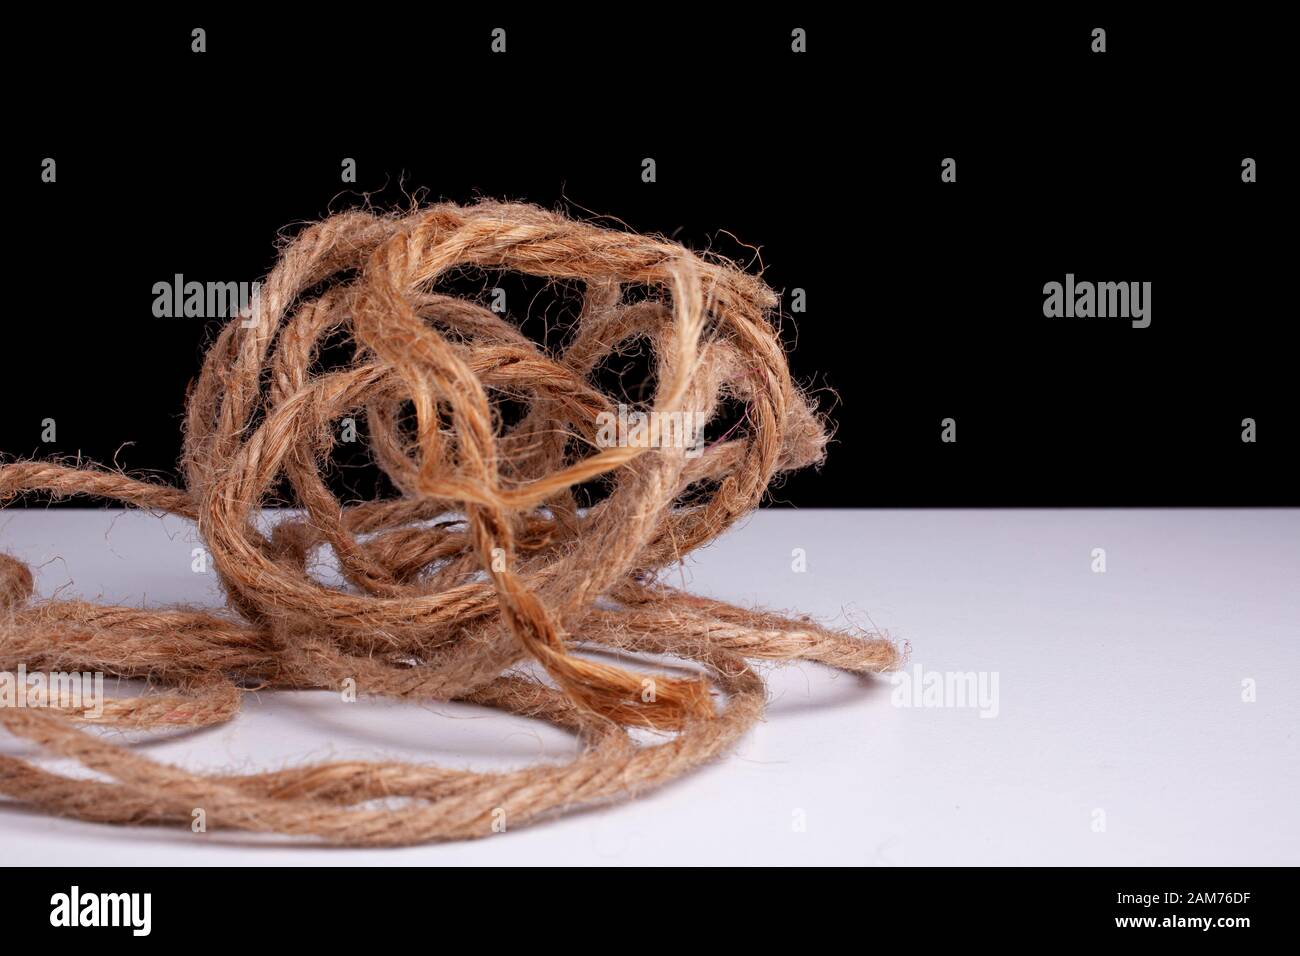 Unorganized mess. Tangled, stress, confused, complicated, concept image. Large ball of tangled and hemp string Stock Photo